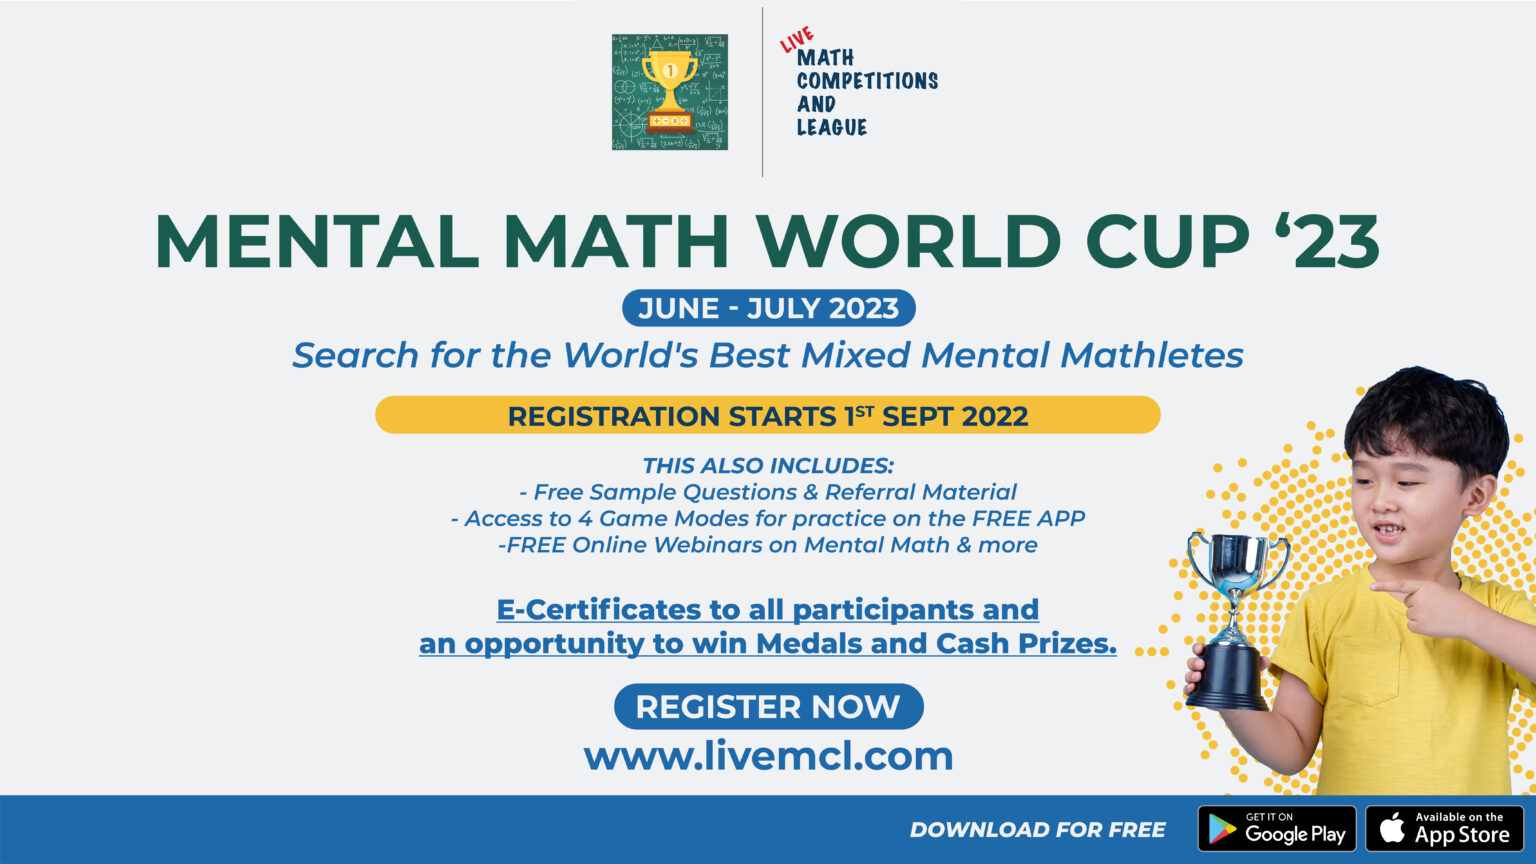 Events Live Math Competitions and League